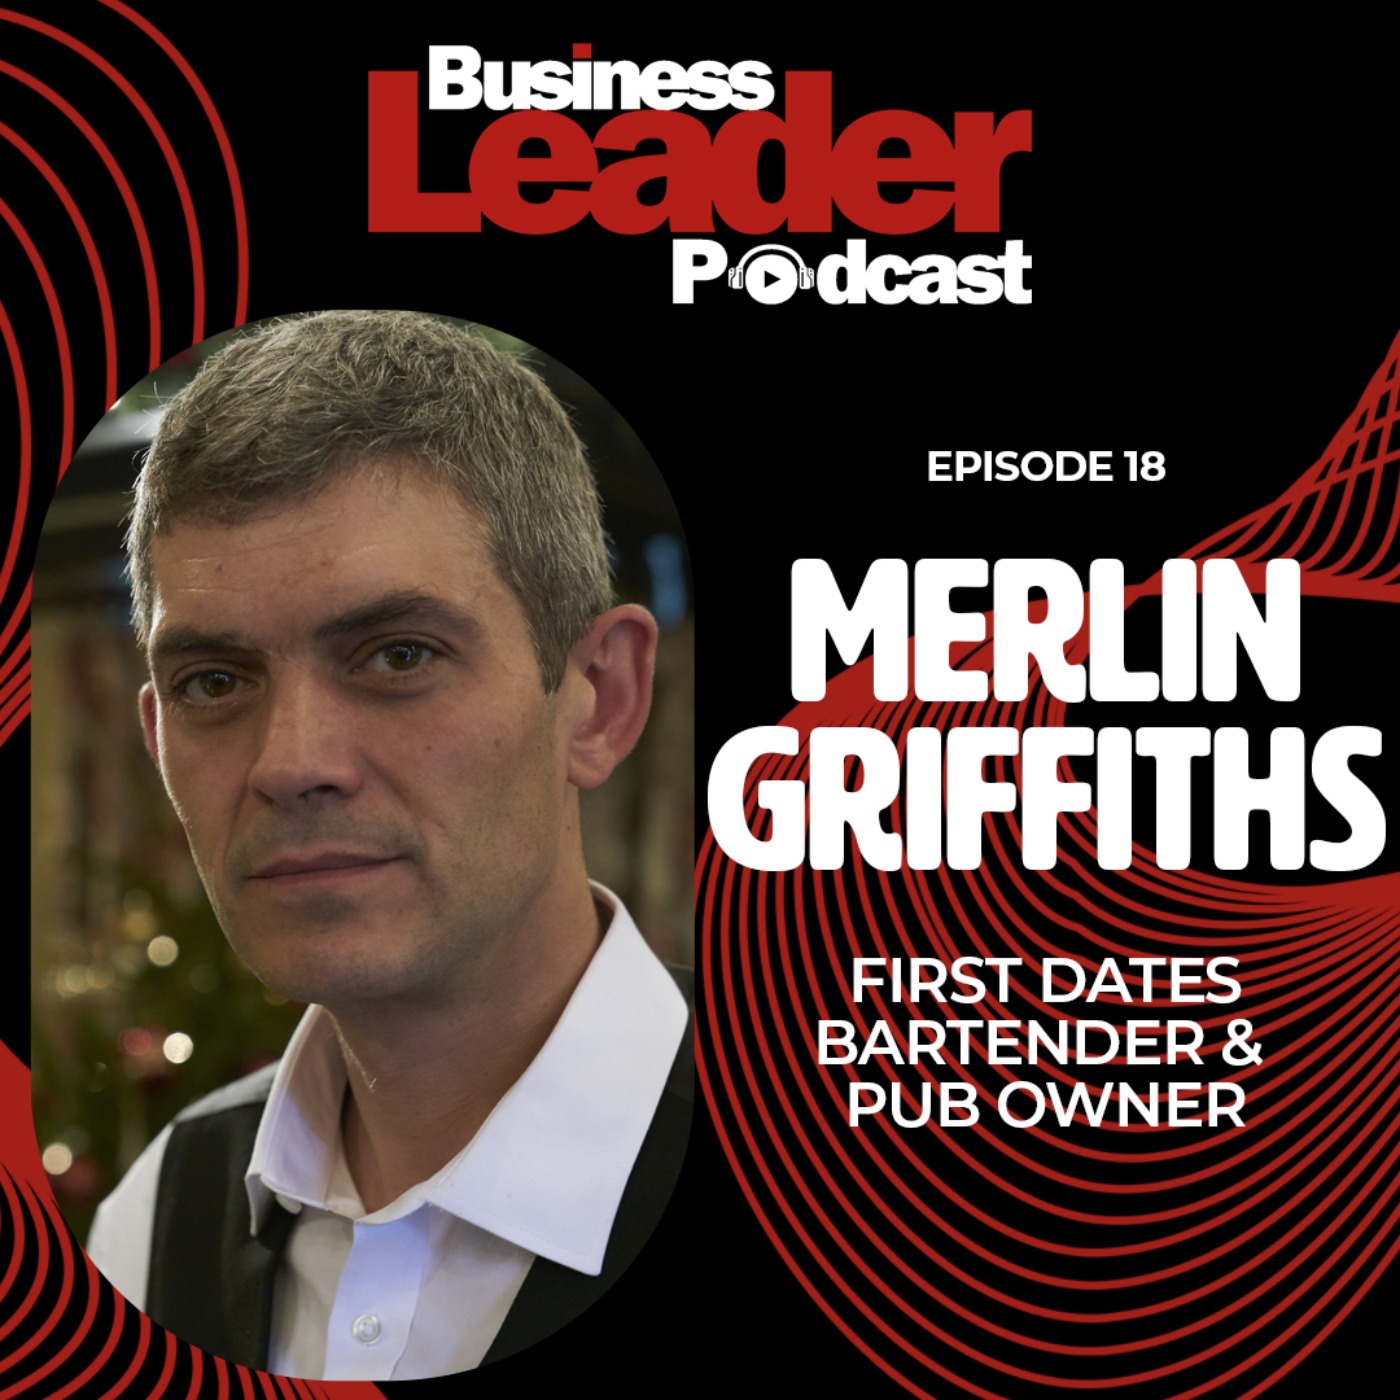 Merlin Griffiths: First Dates bartender and pub owner